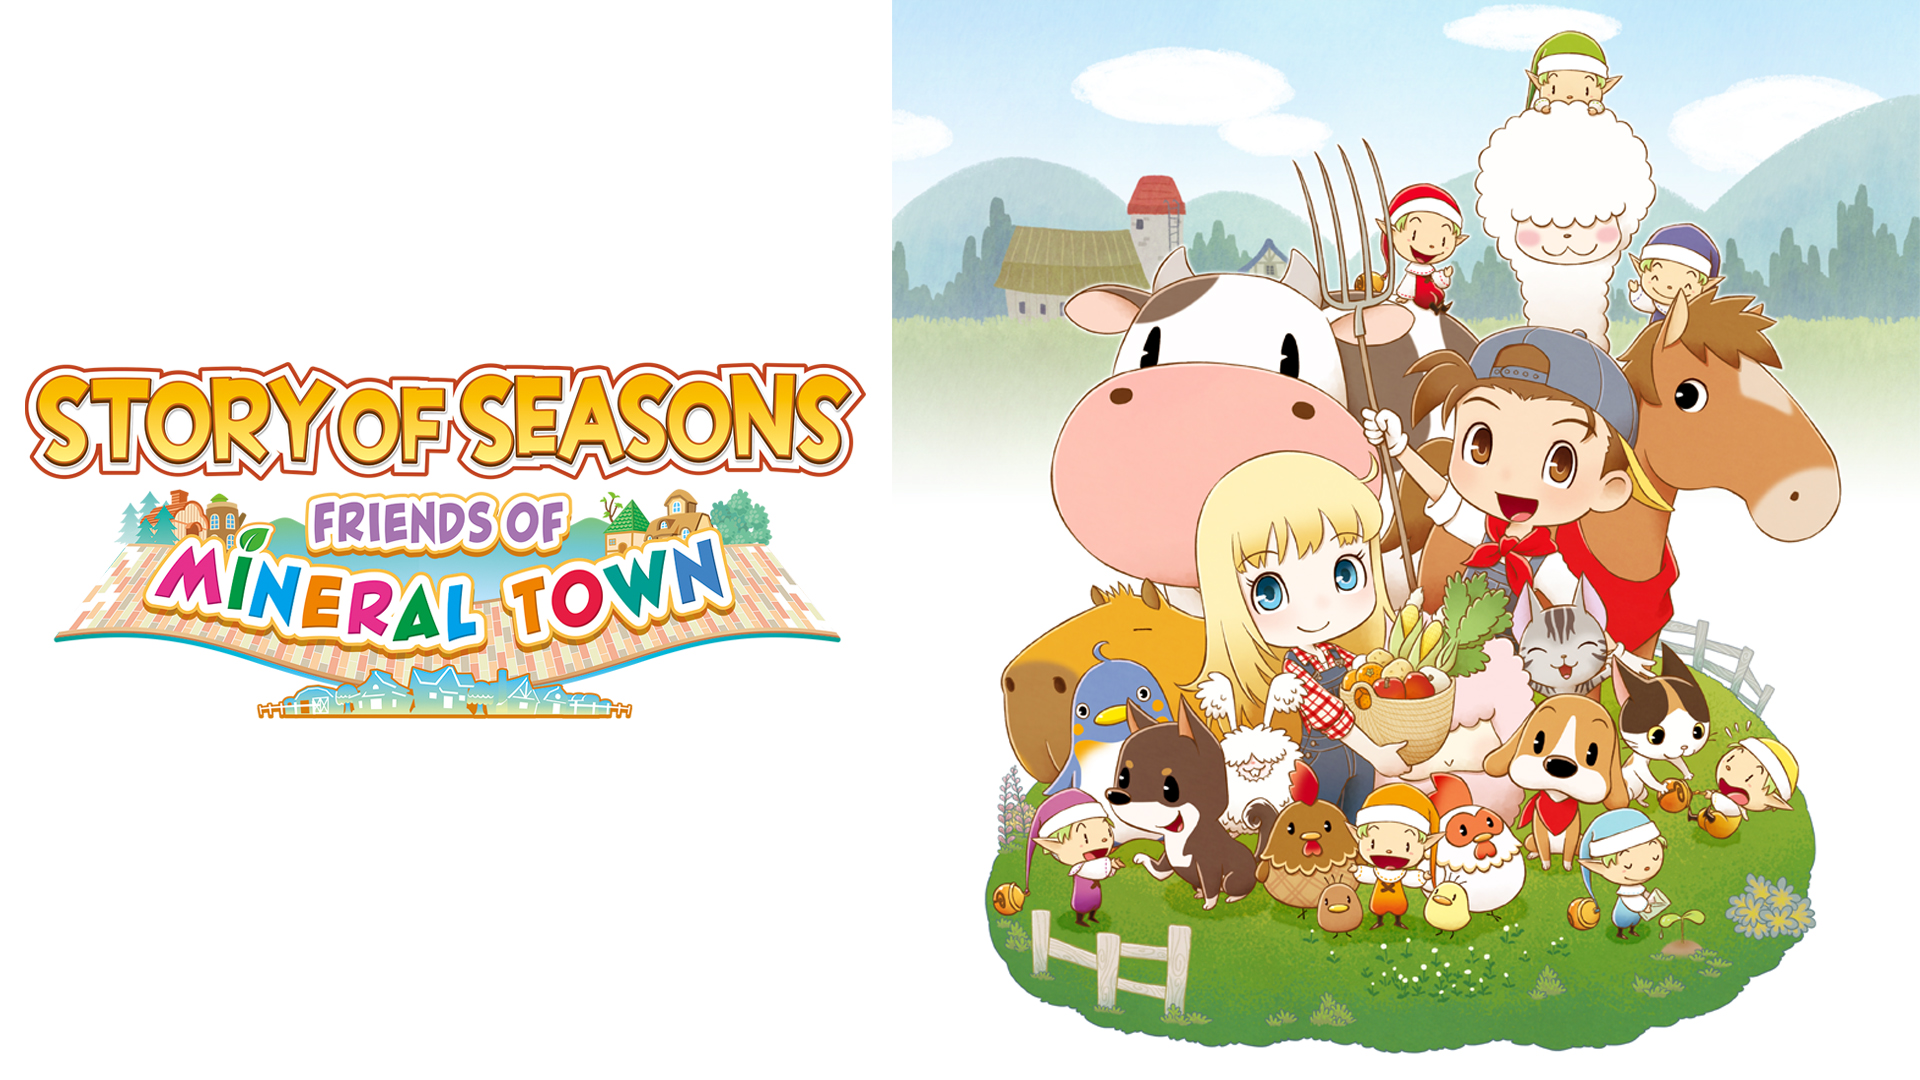 Story of Seasons: Friends of Mineral Town Heads to Xbox One and PS4